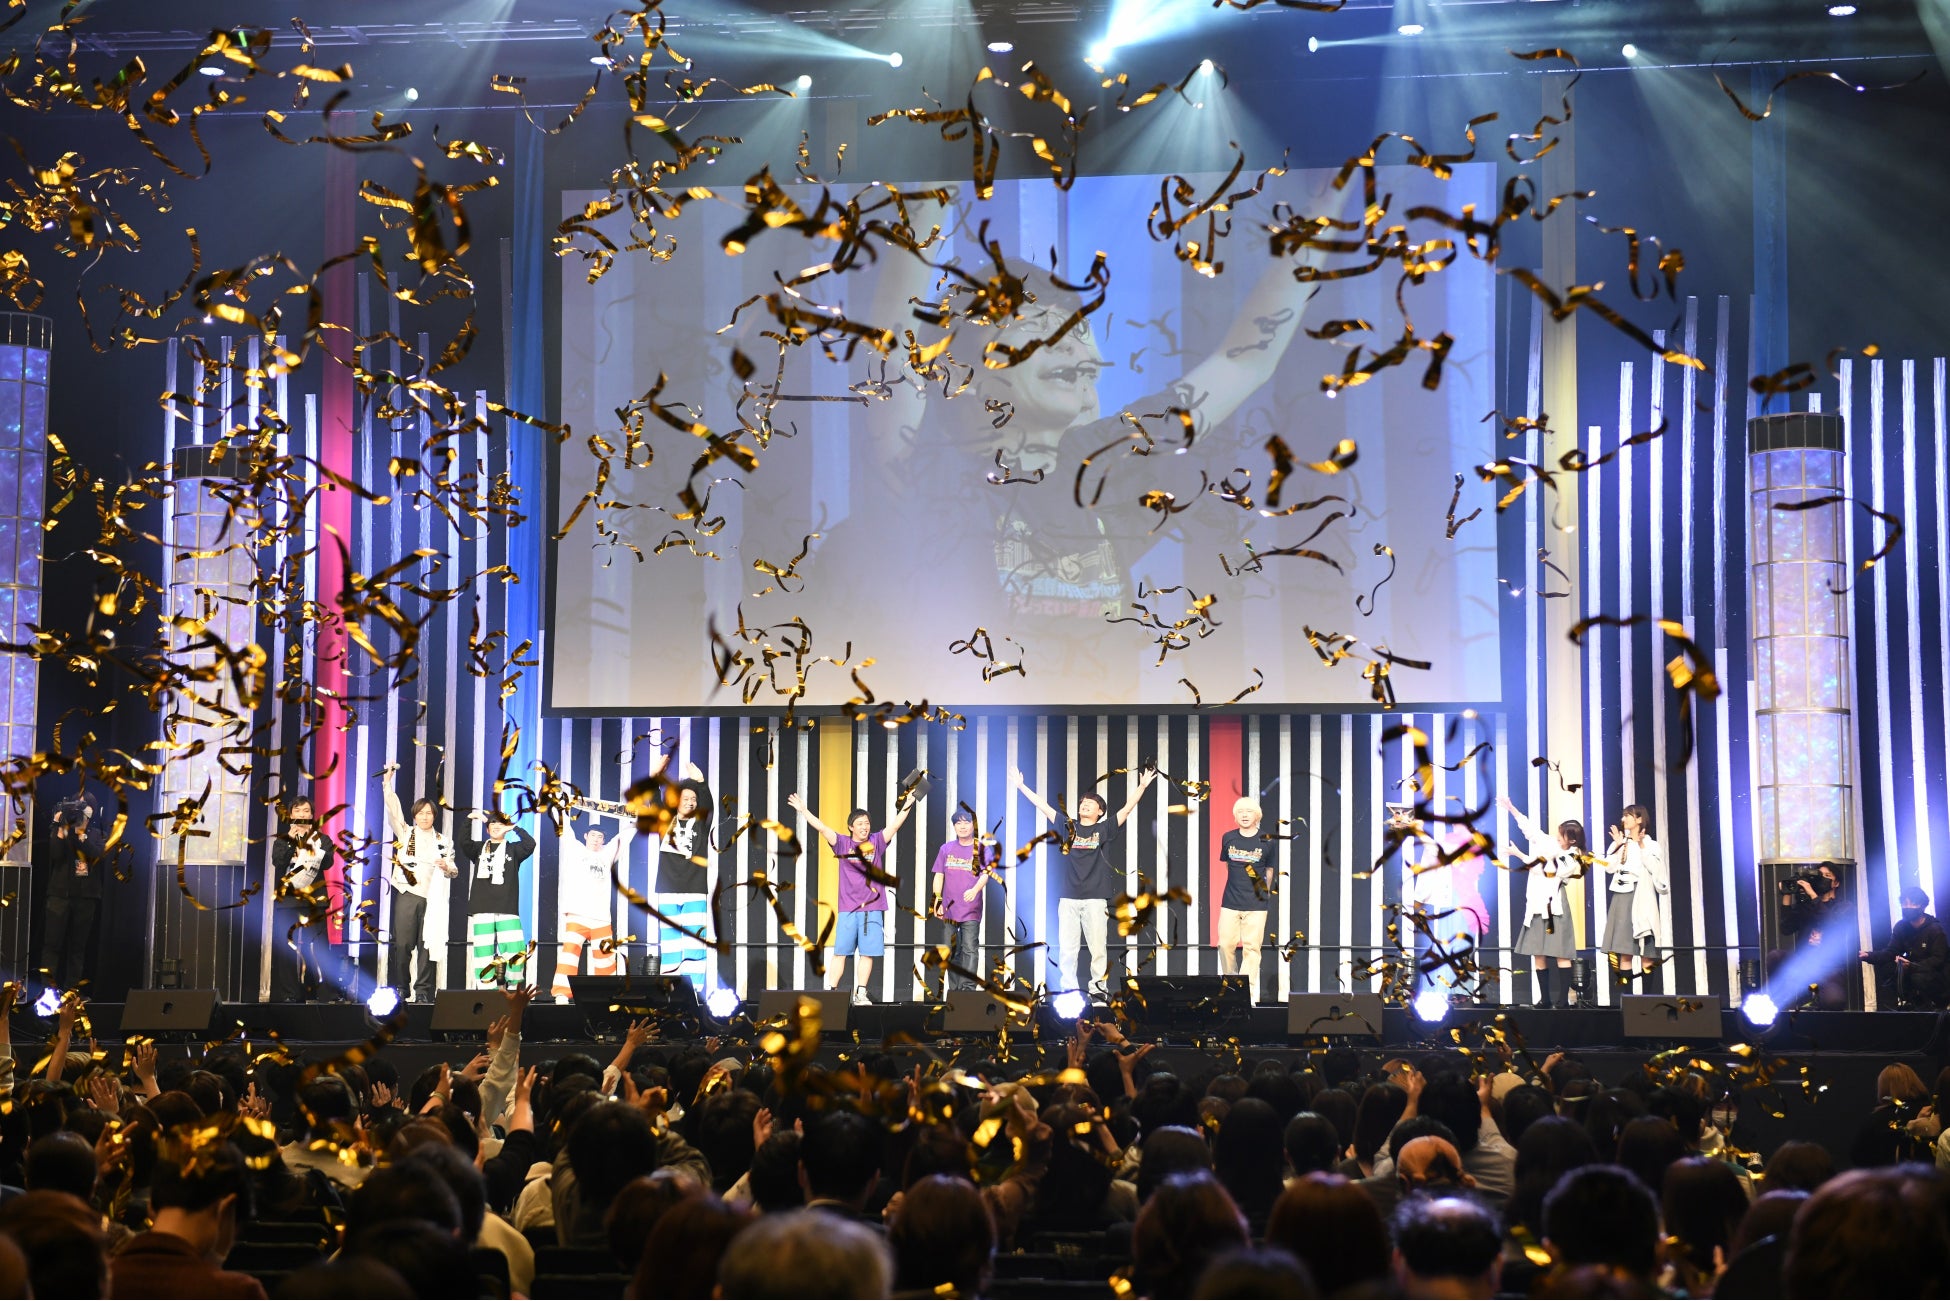 『hololive 4th fes. Our Bright Parade』から「holo*27 stage」のライブレポートが公開！